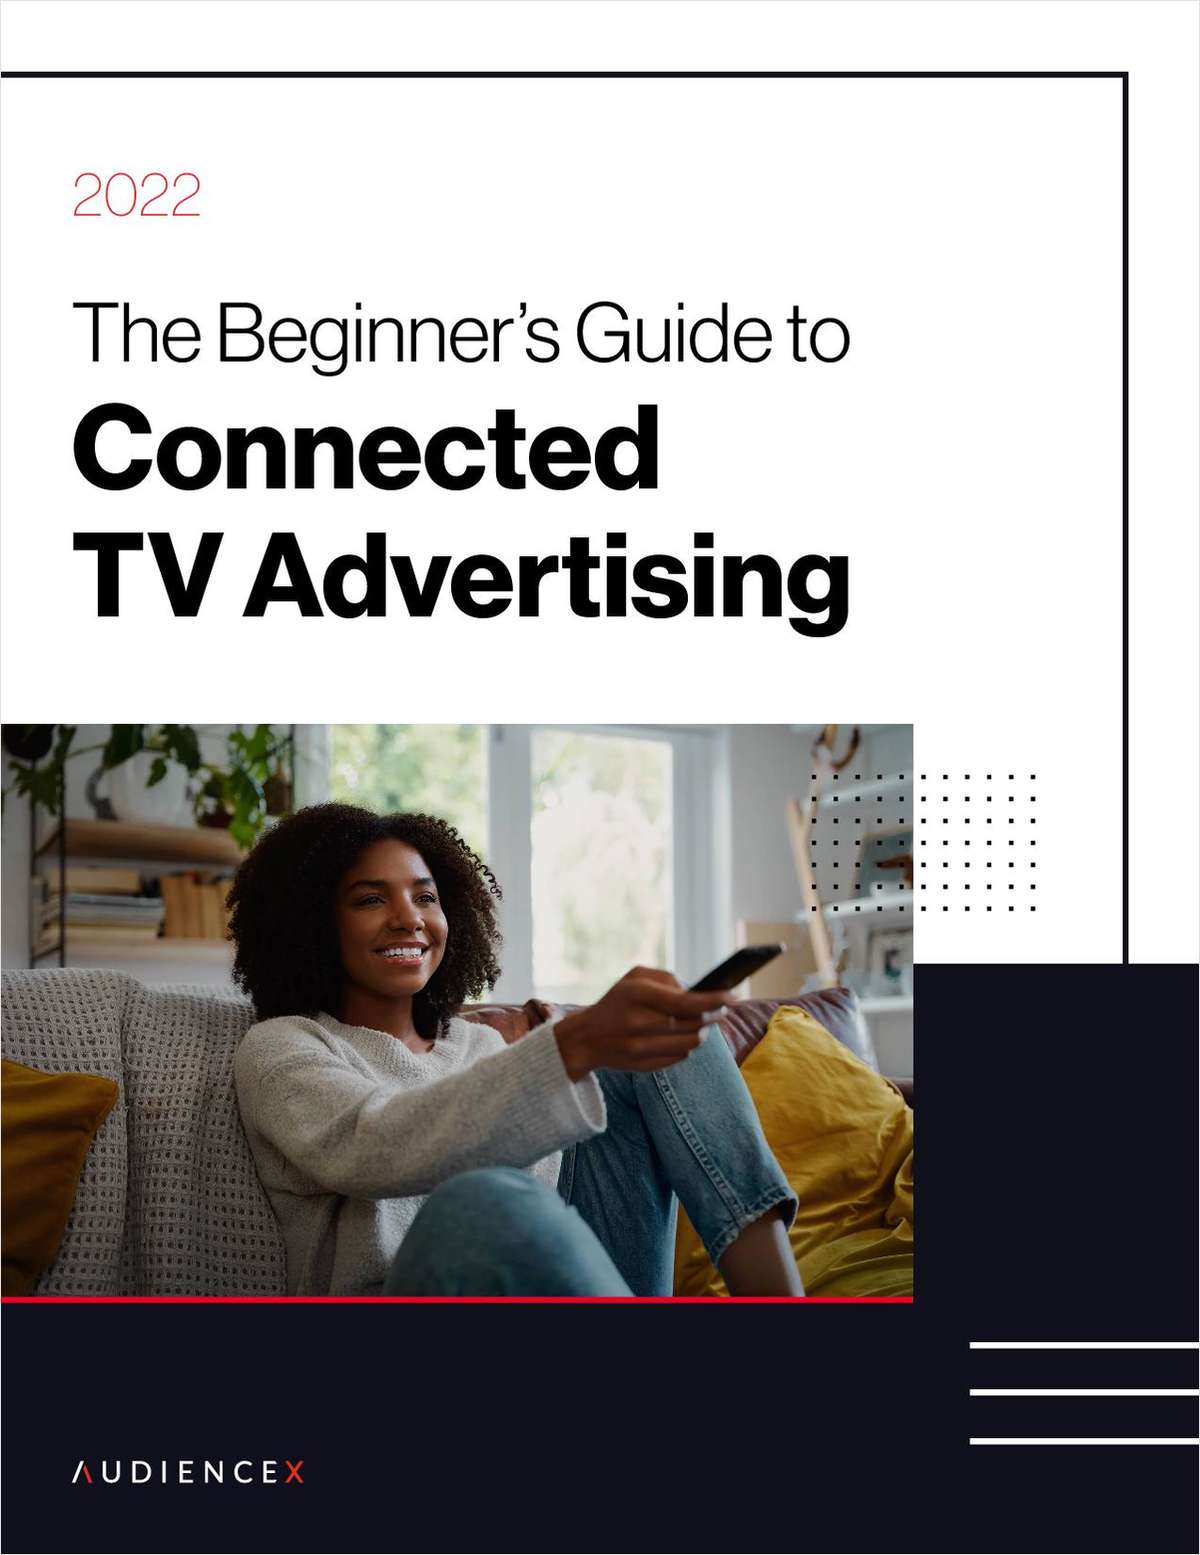 The Beginner's Guide to Connected TV Advertising